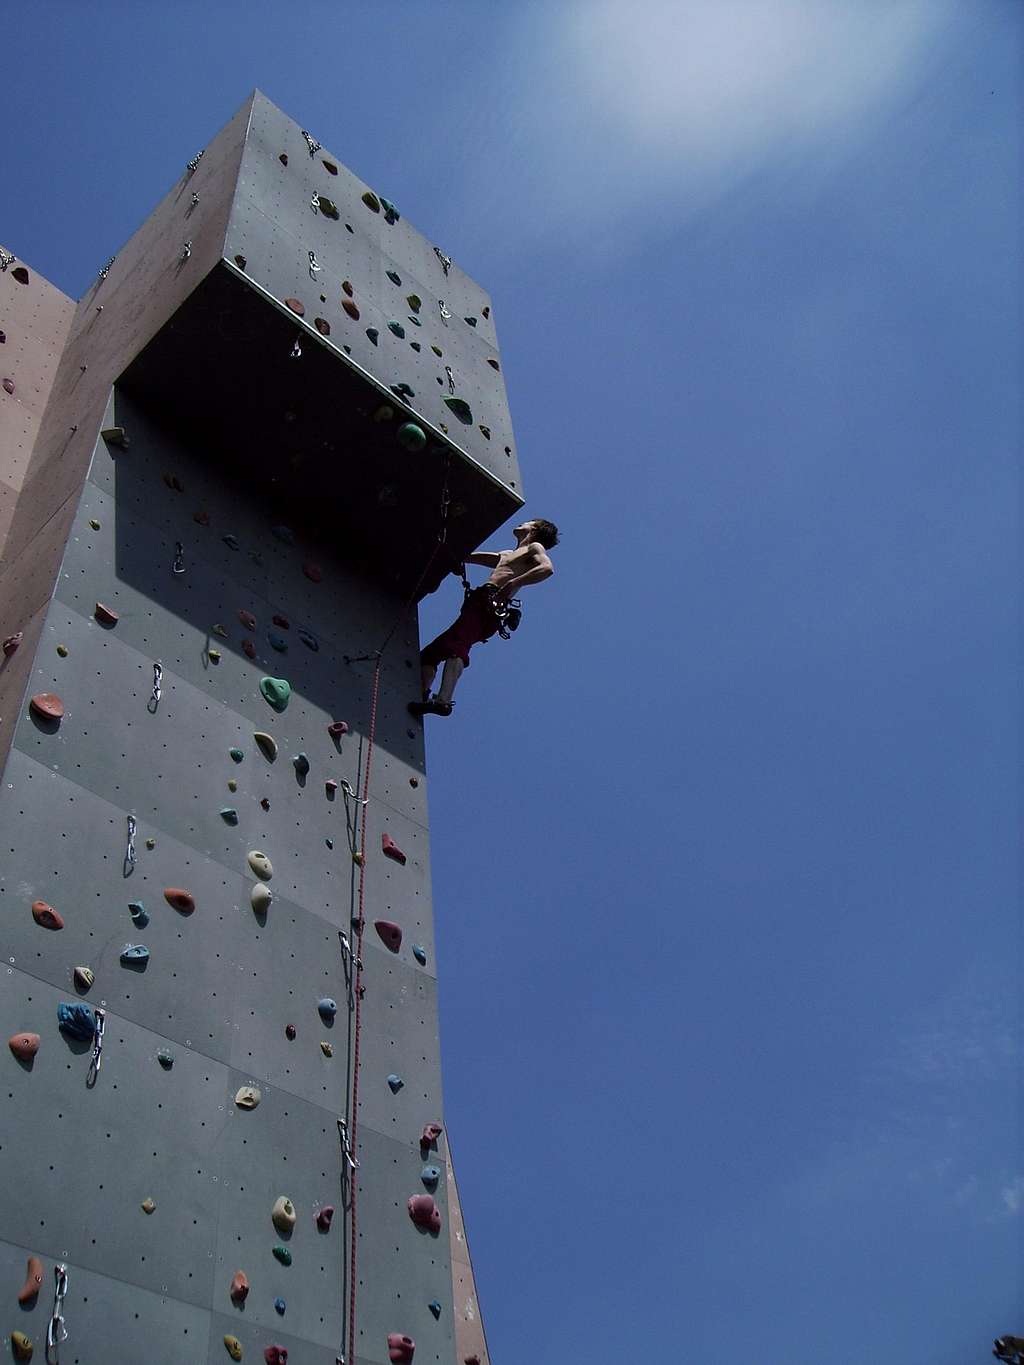 Climbing in the Netherlands!